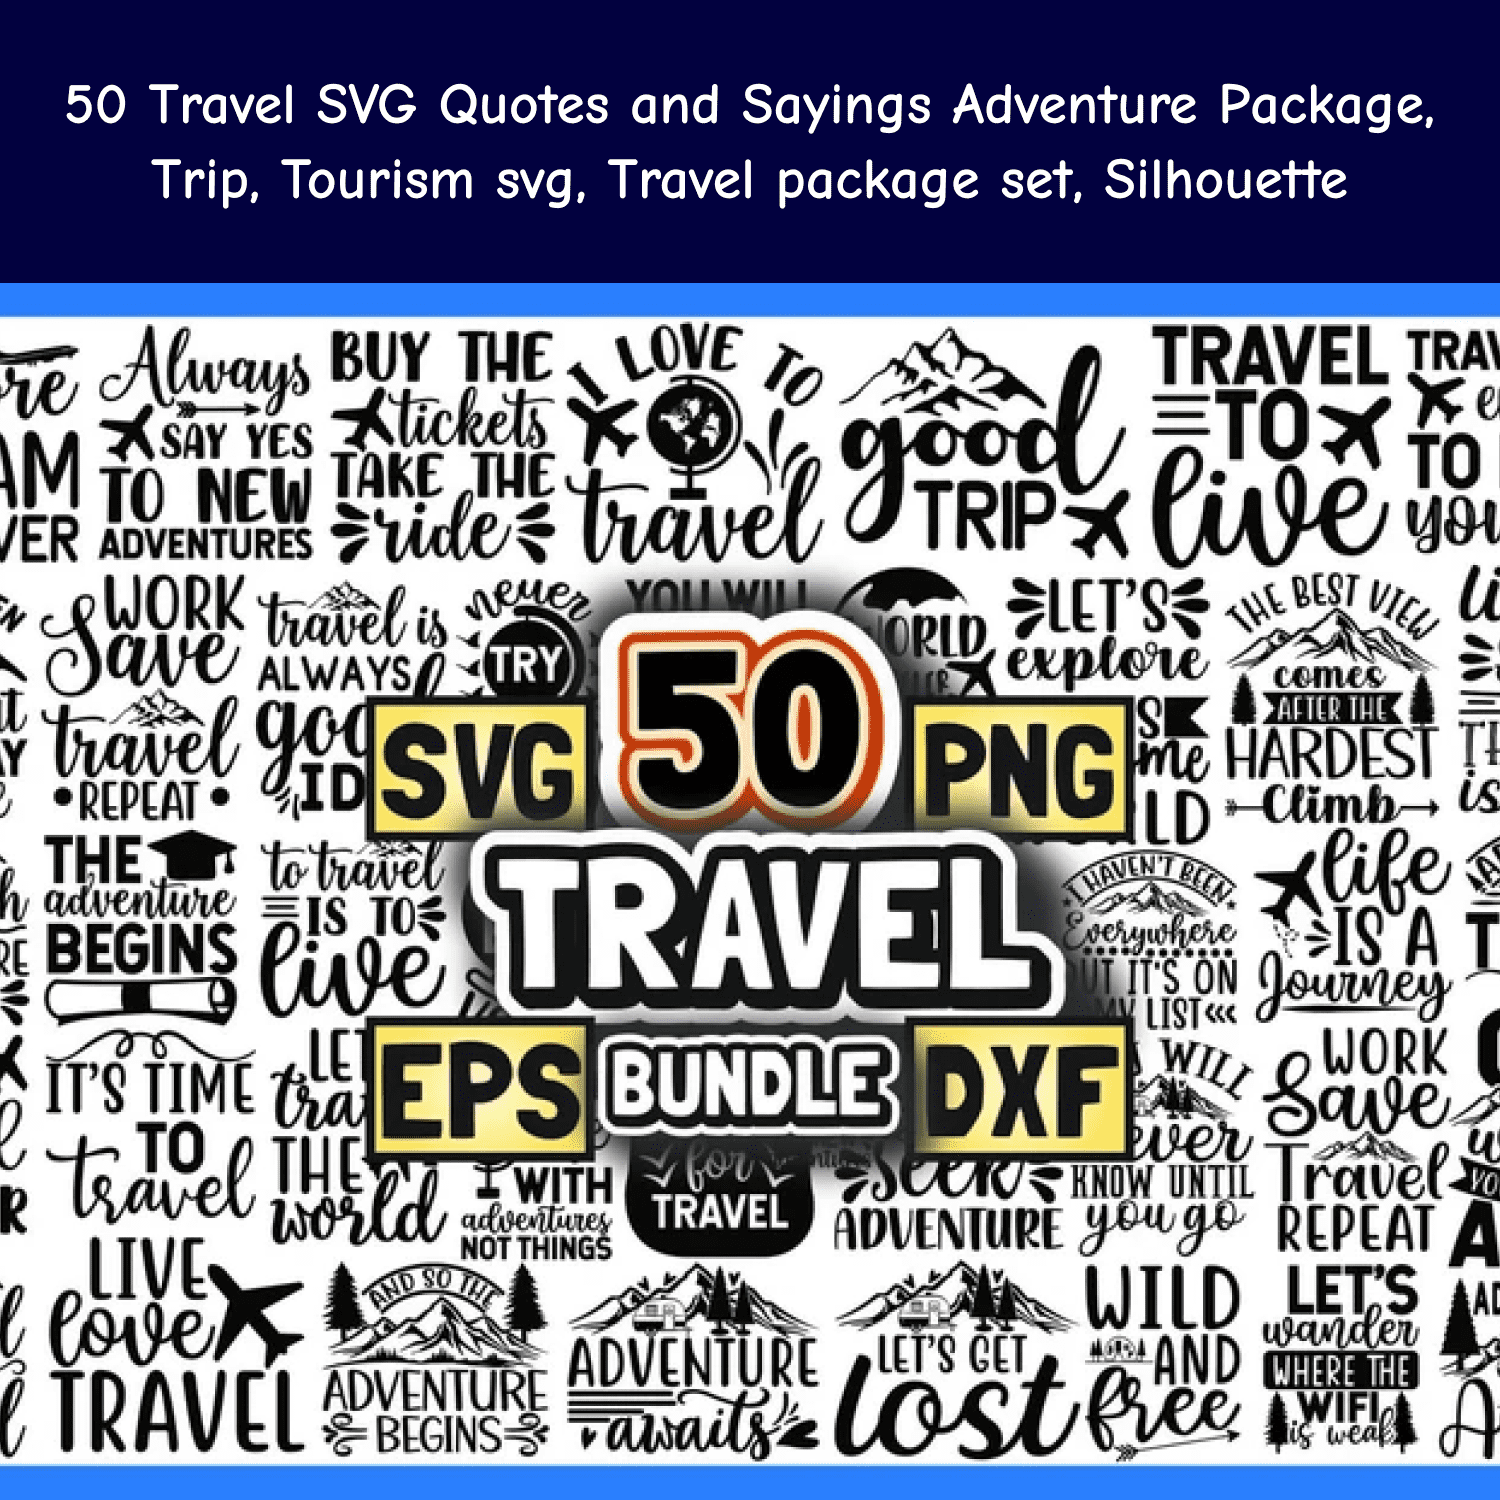 50 Travel SVG Quotes & Sayings Bundle Adventure cover.